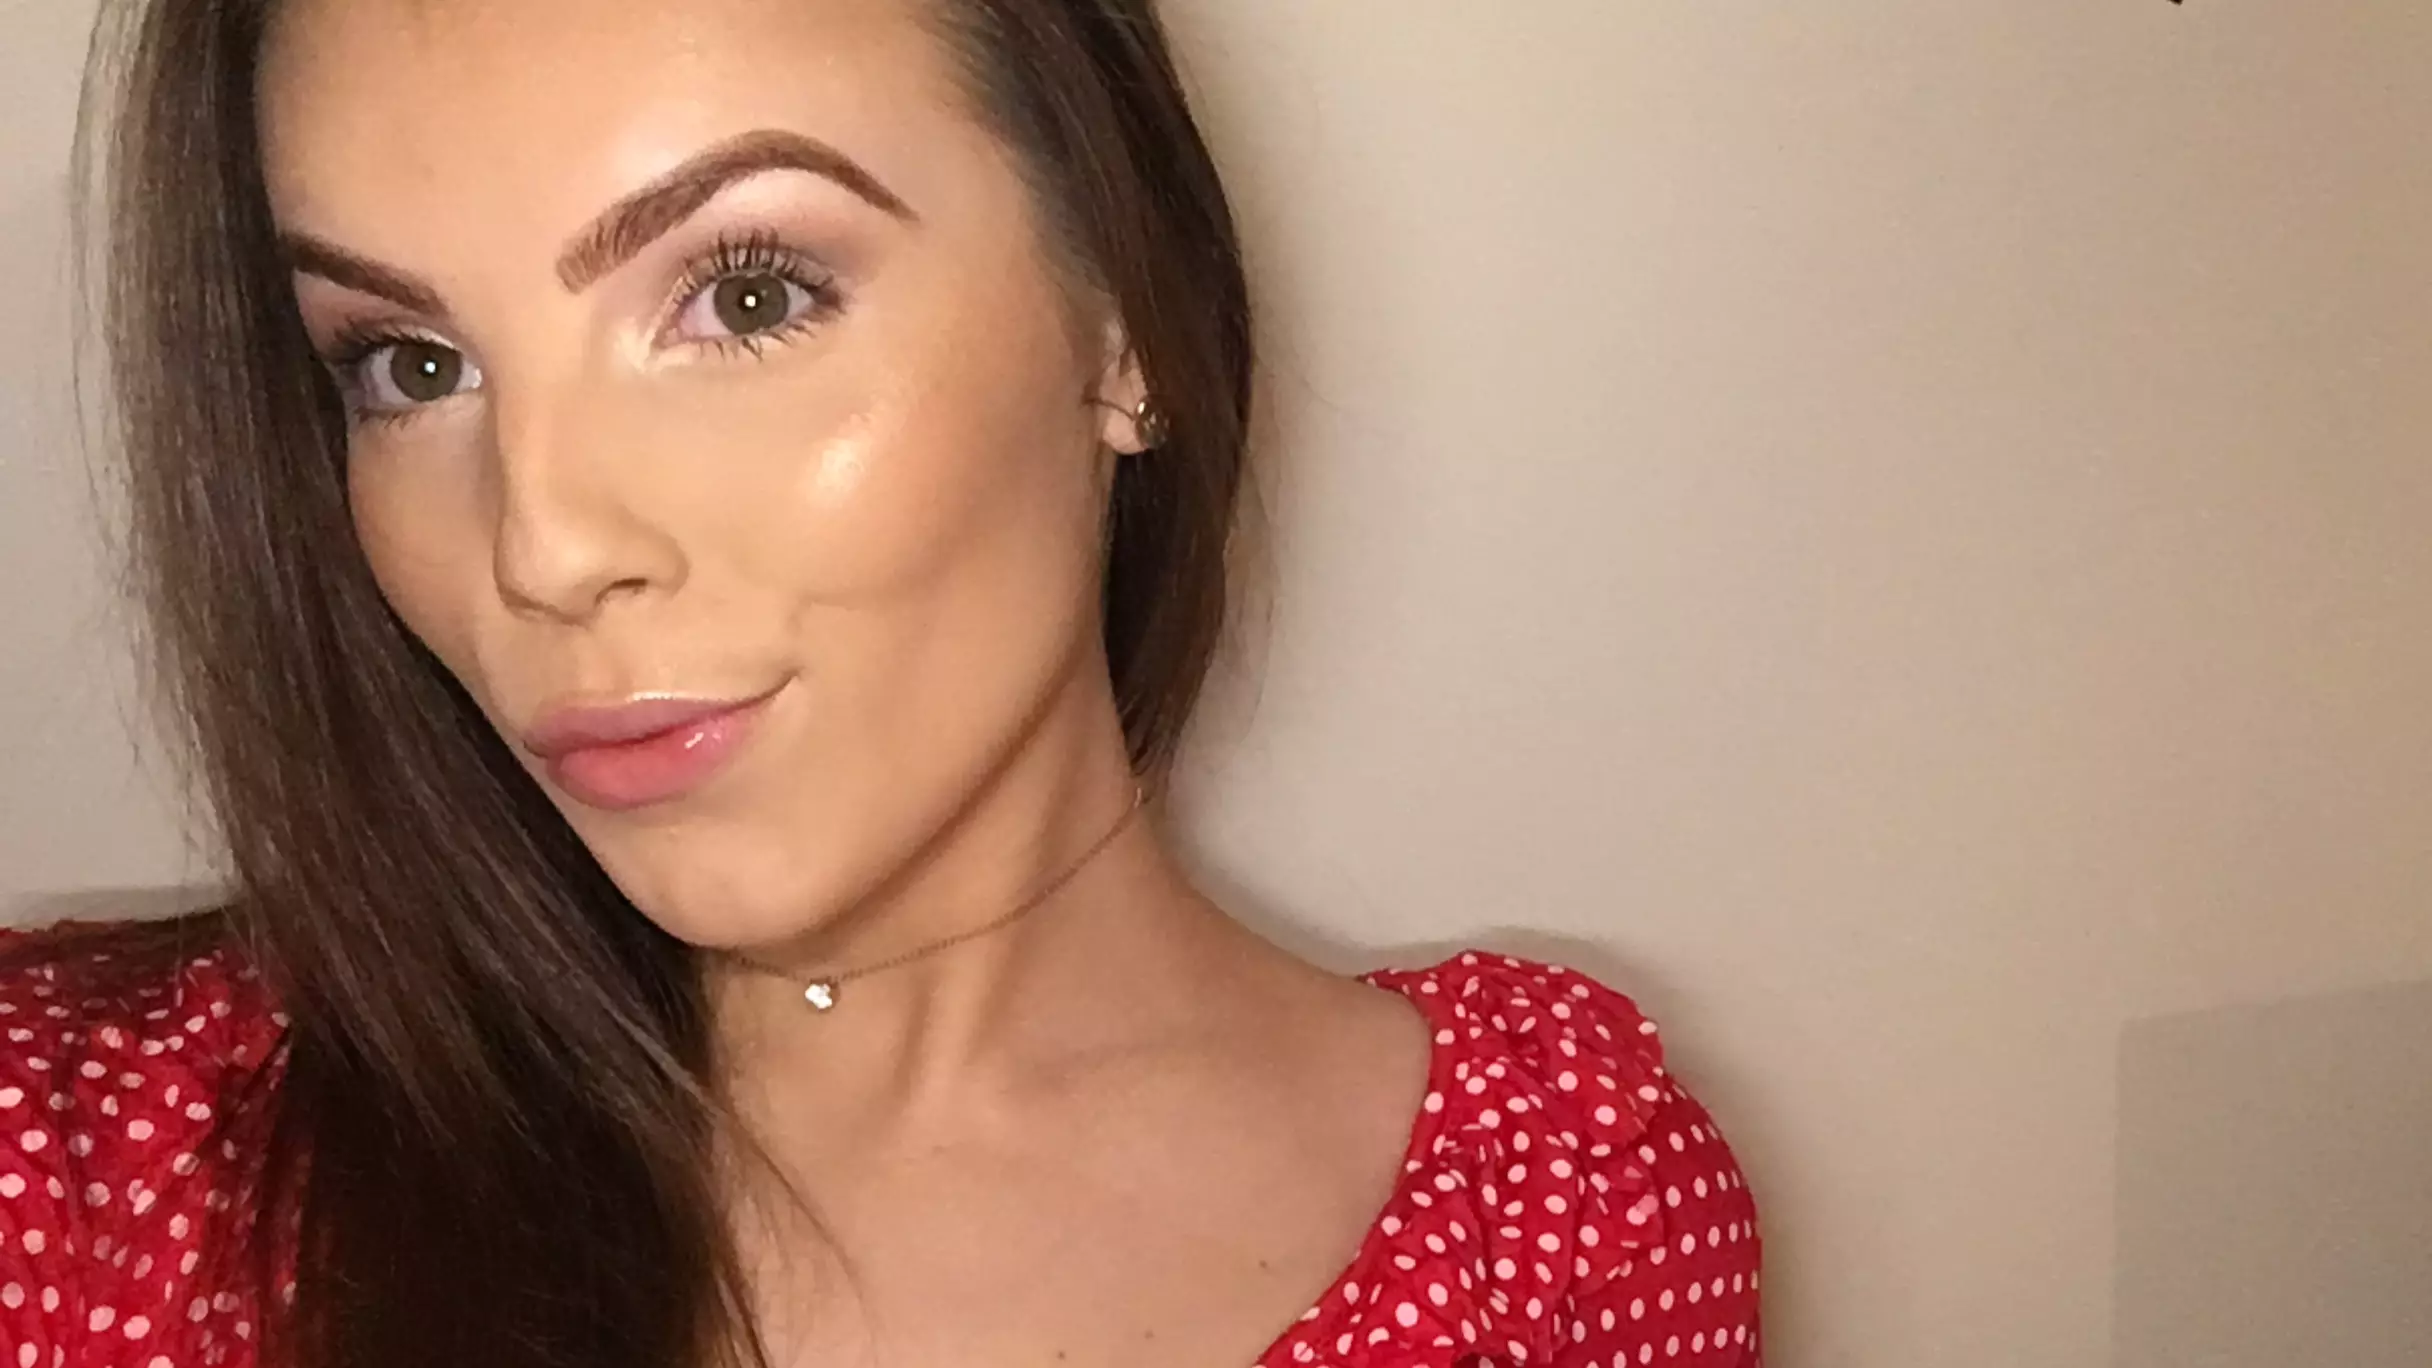 This Woman’s Eczema Was So Bad She Stayed Home For A Year